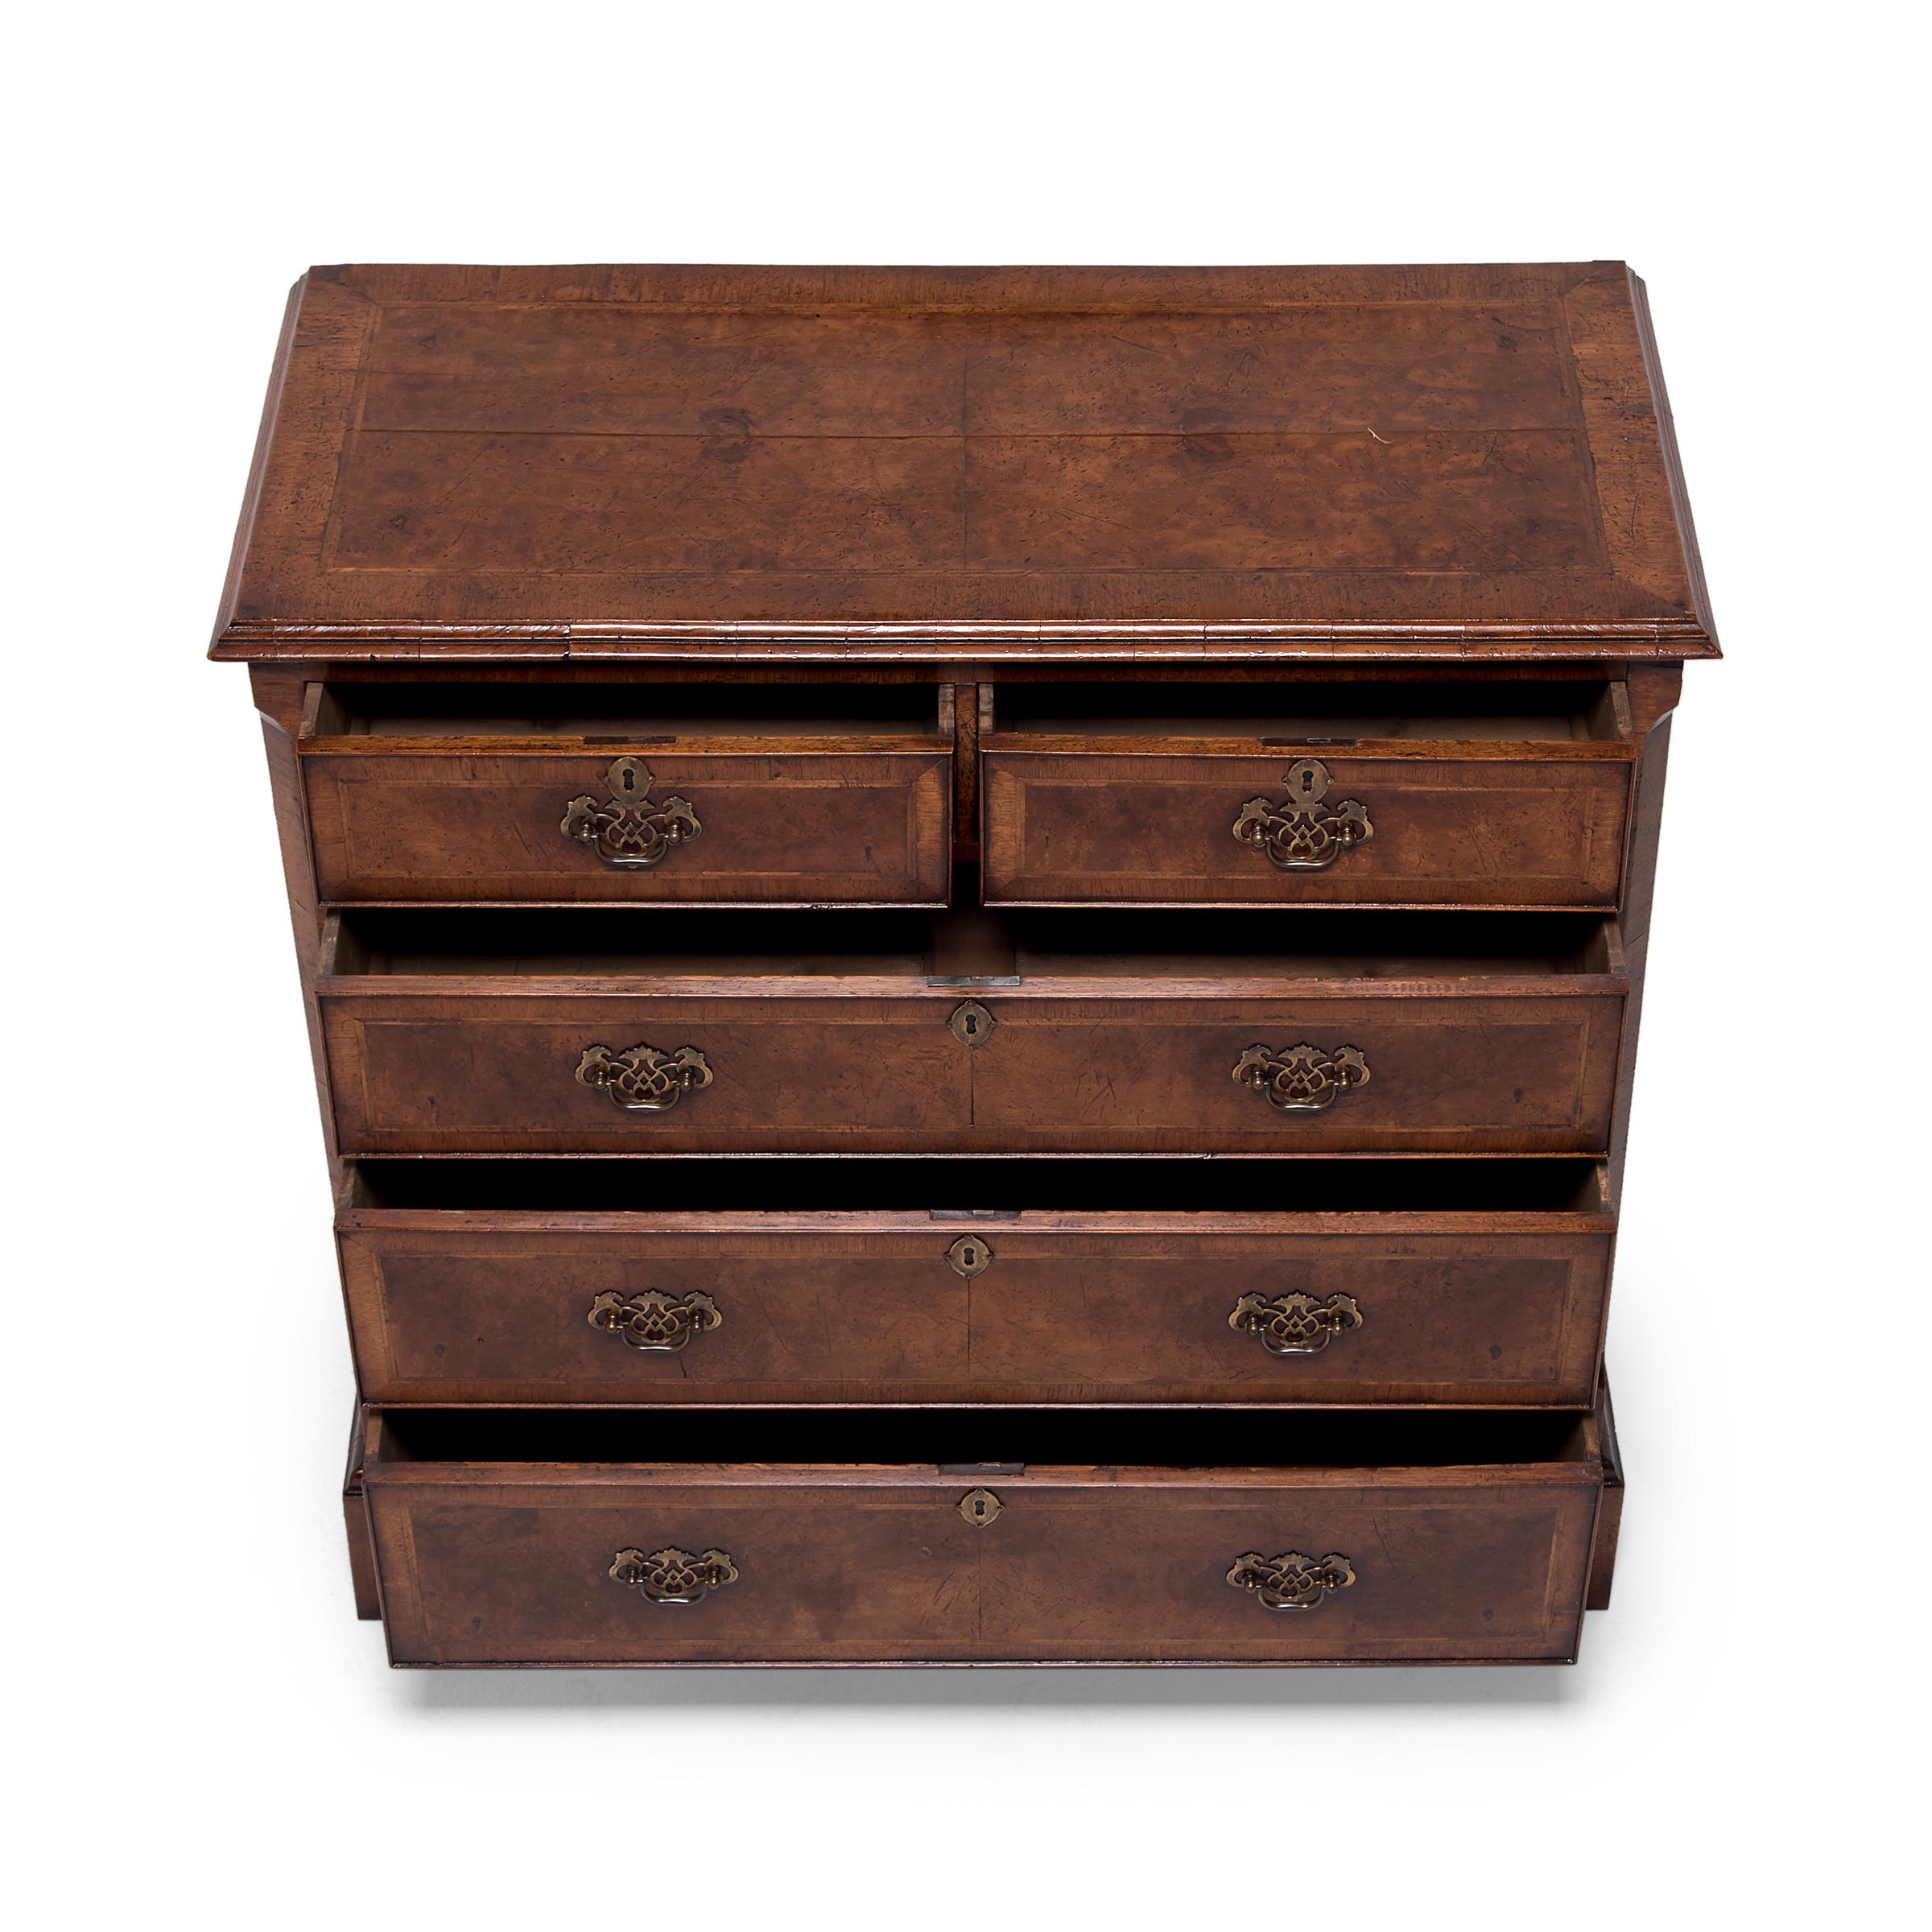 British Queen Anne Style Burled Walnut Chest of Drawers, c. 1800 For Sale